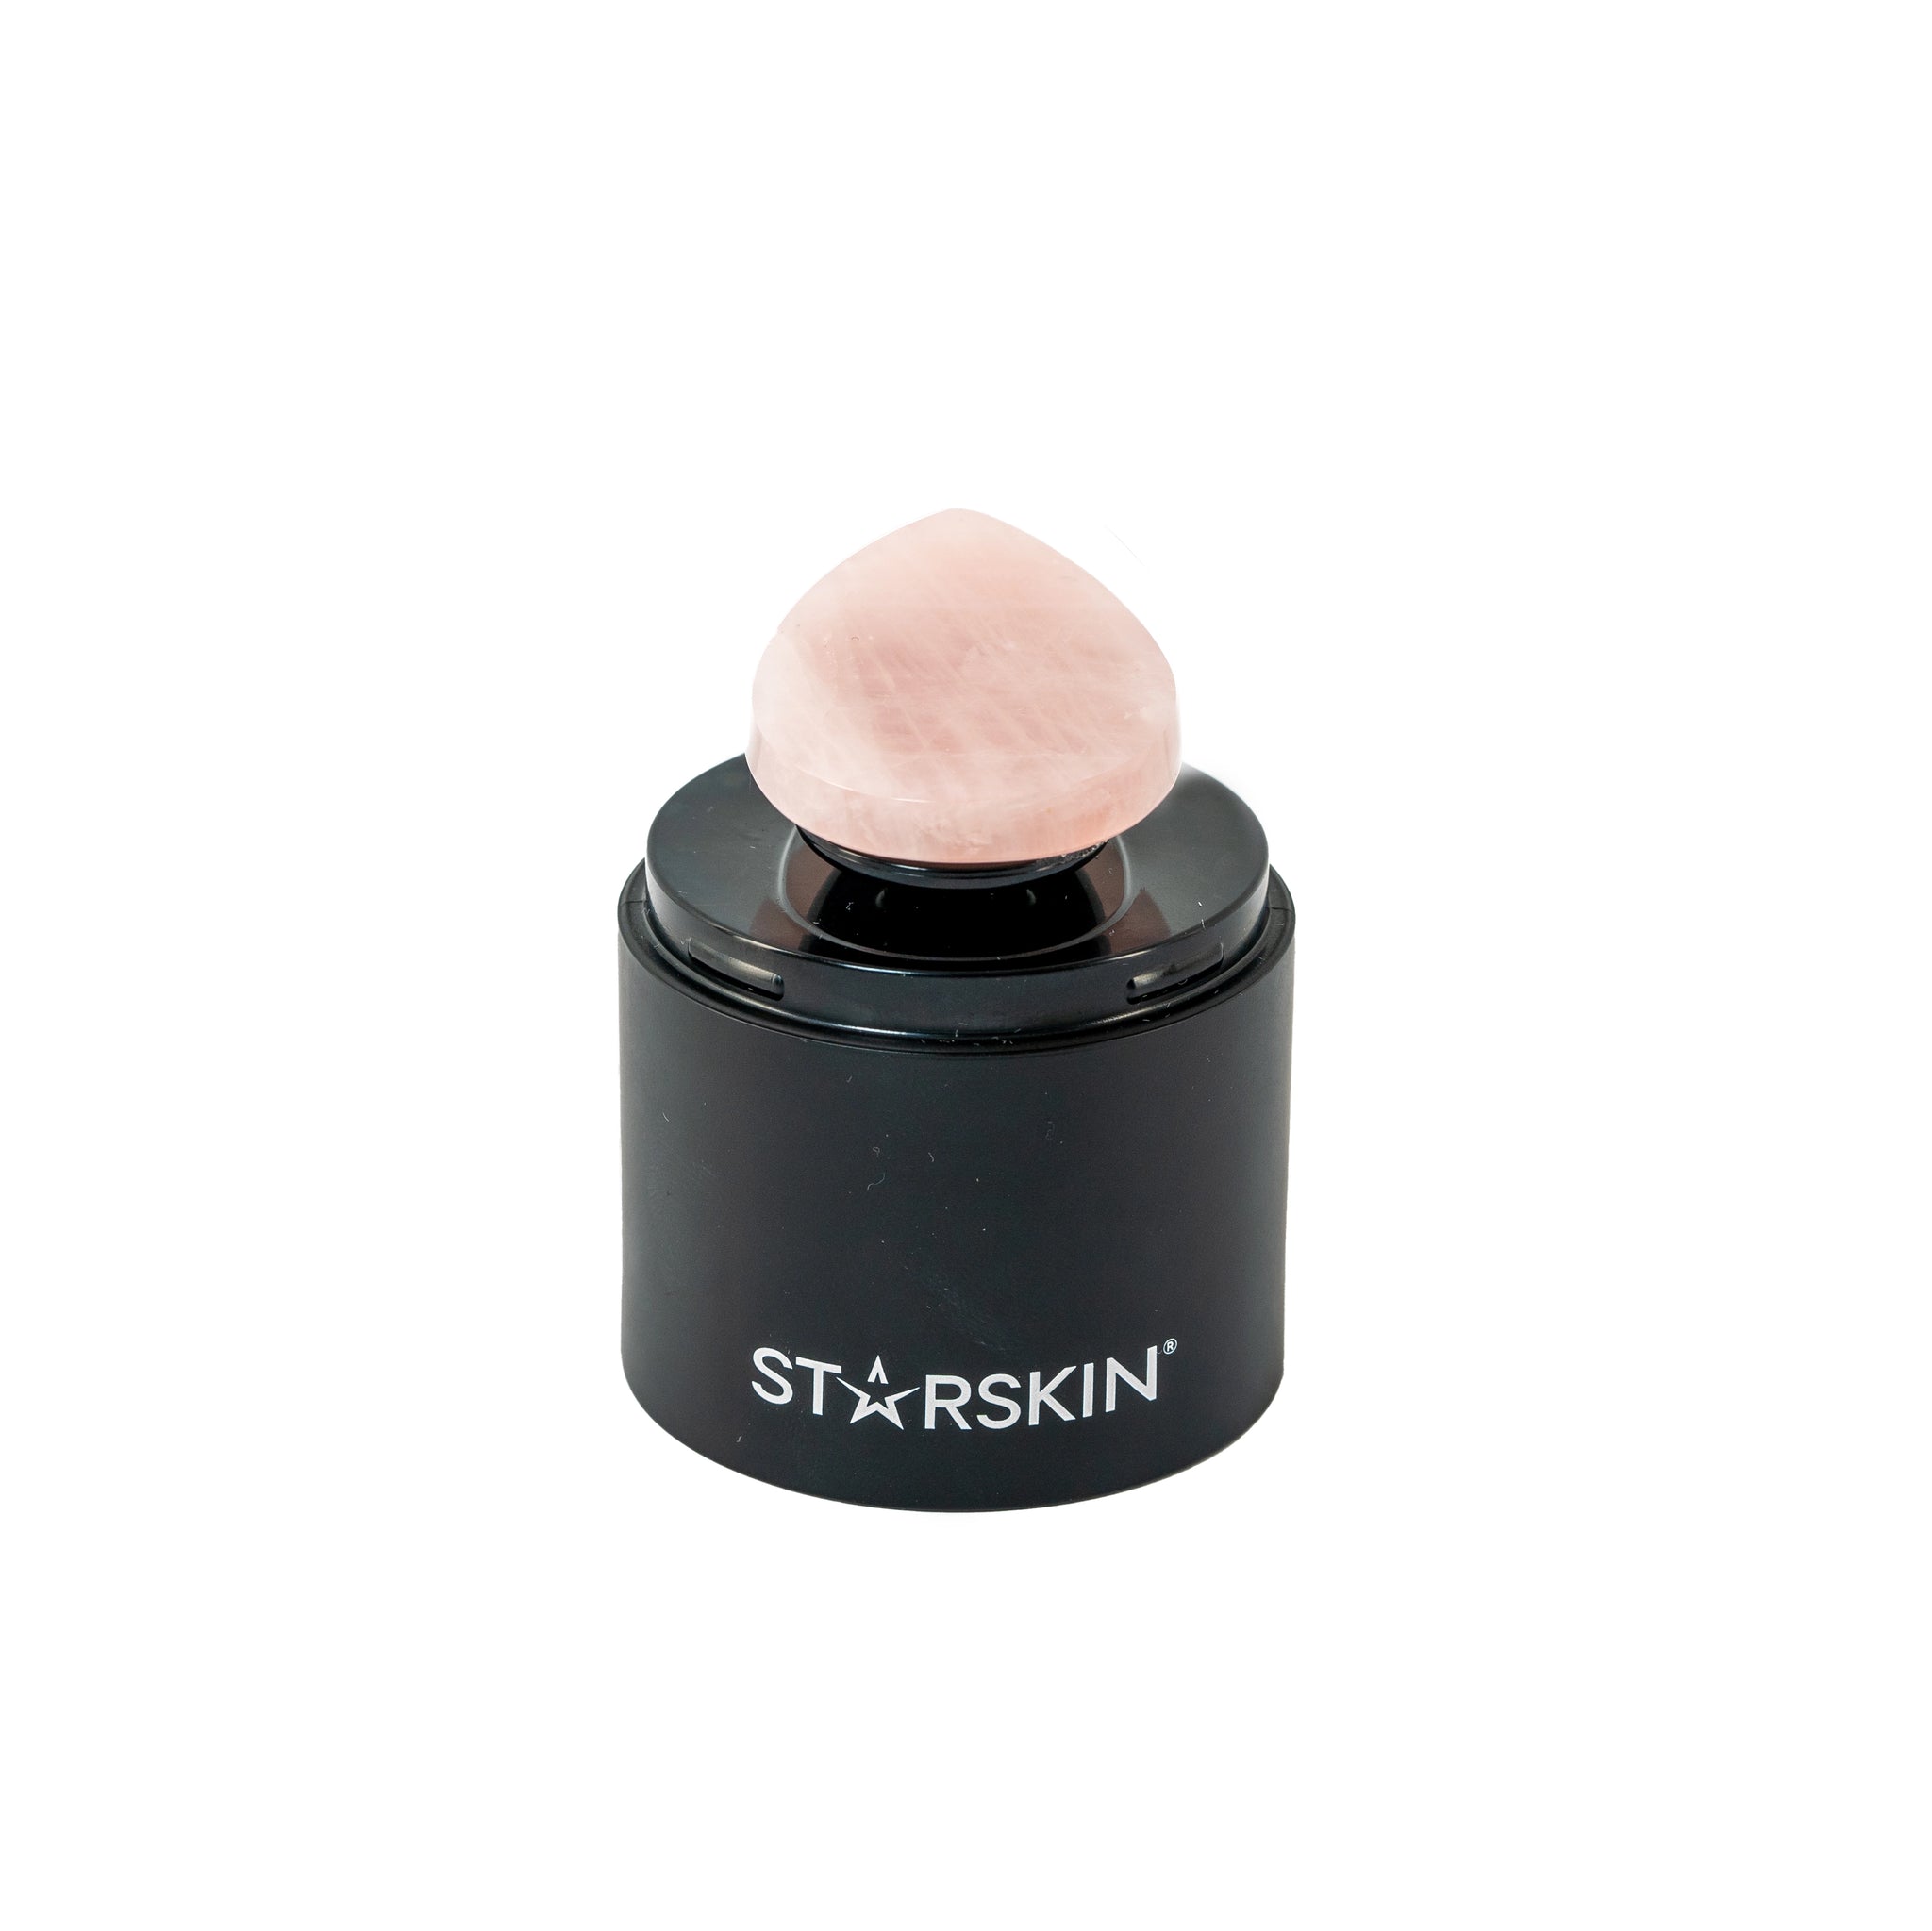 SkinIron Artist FX Rose Quartz stone From Starskin product picture front